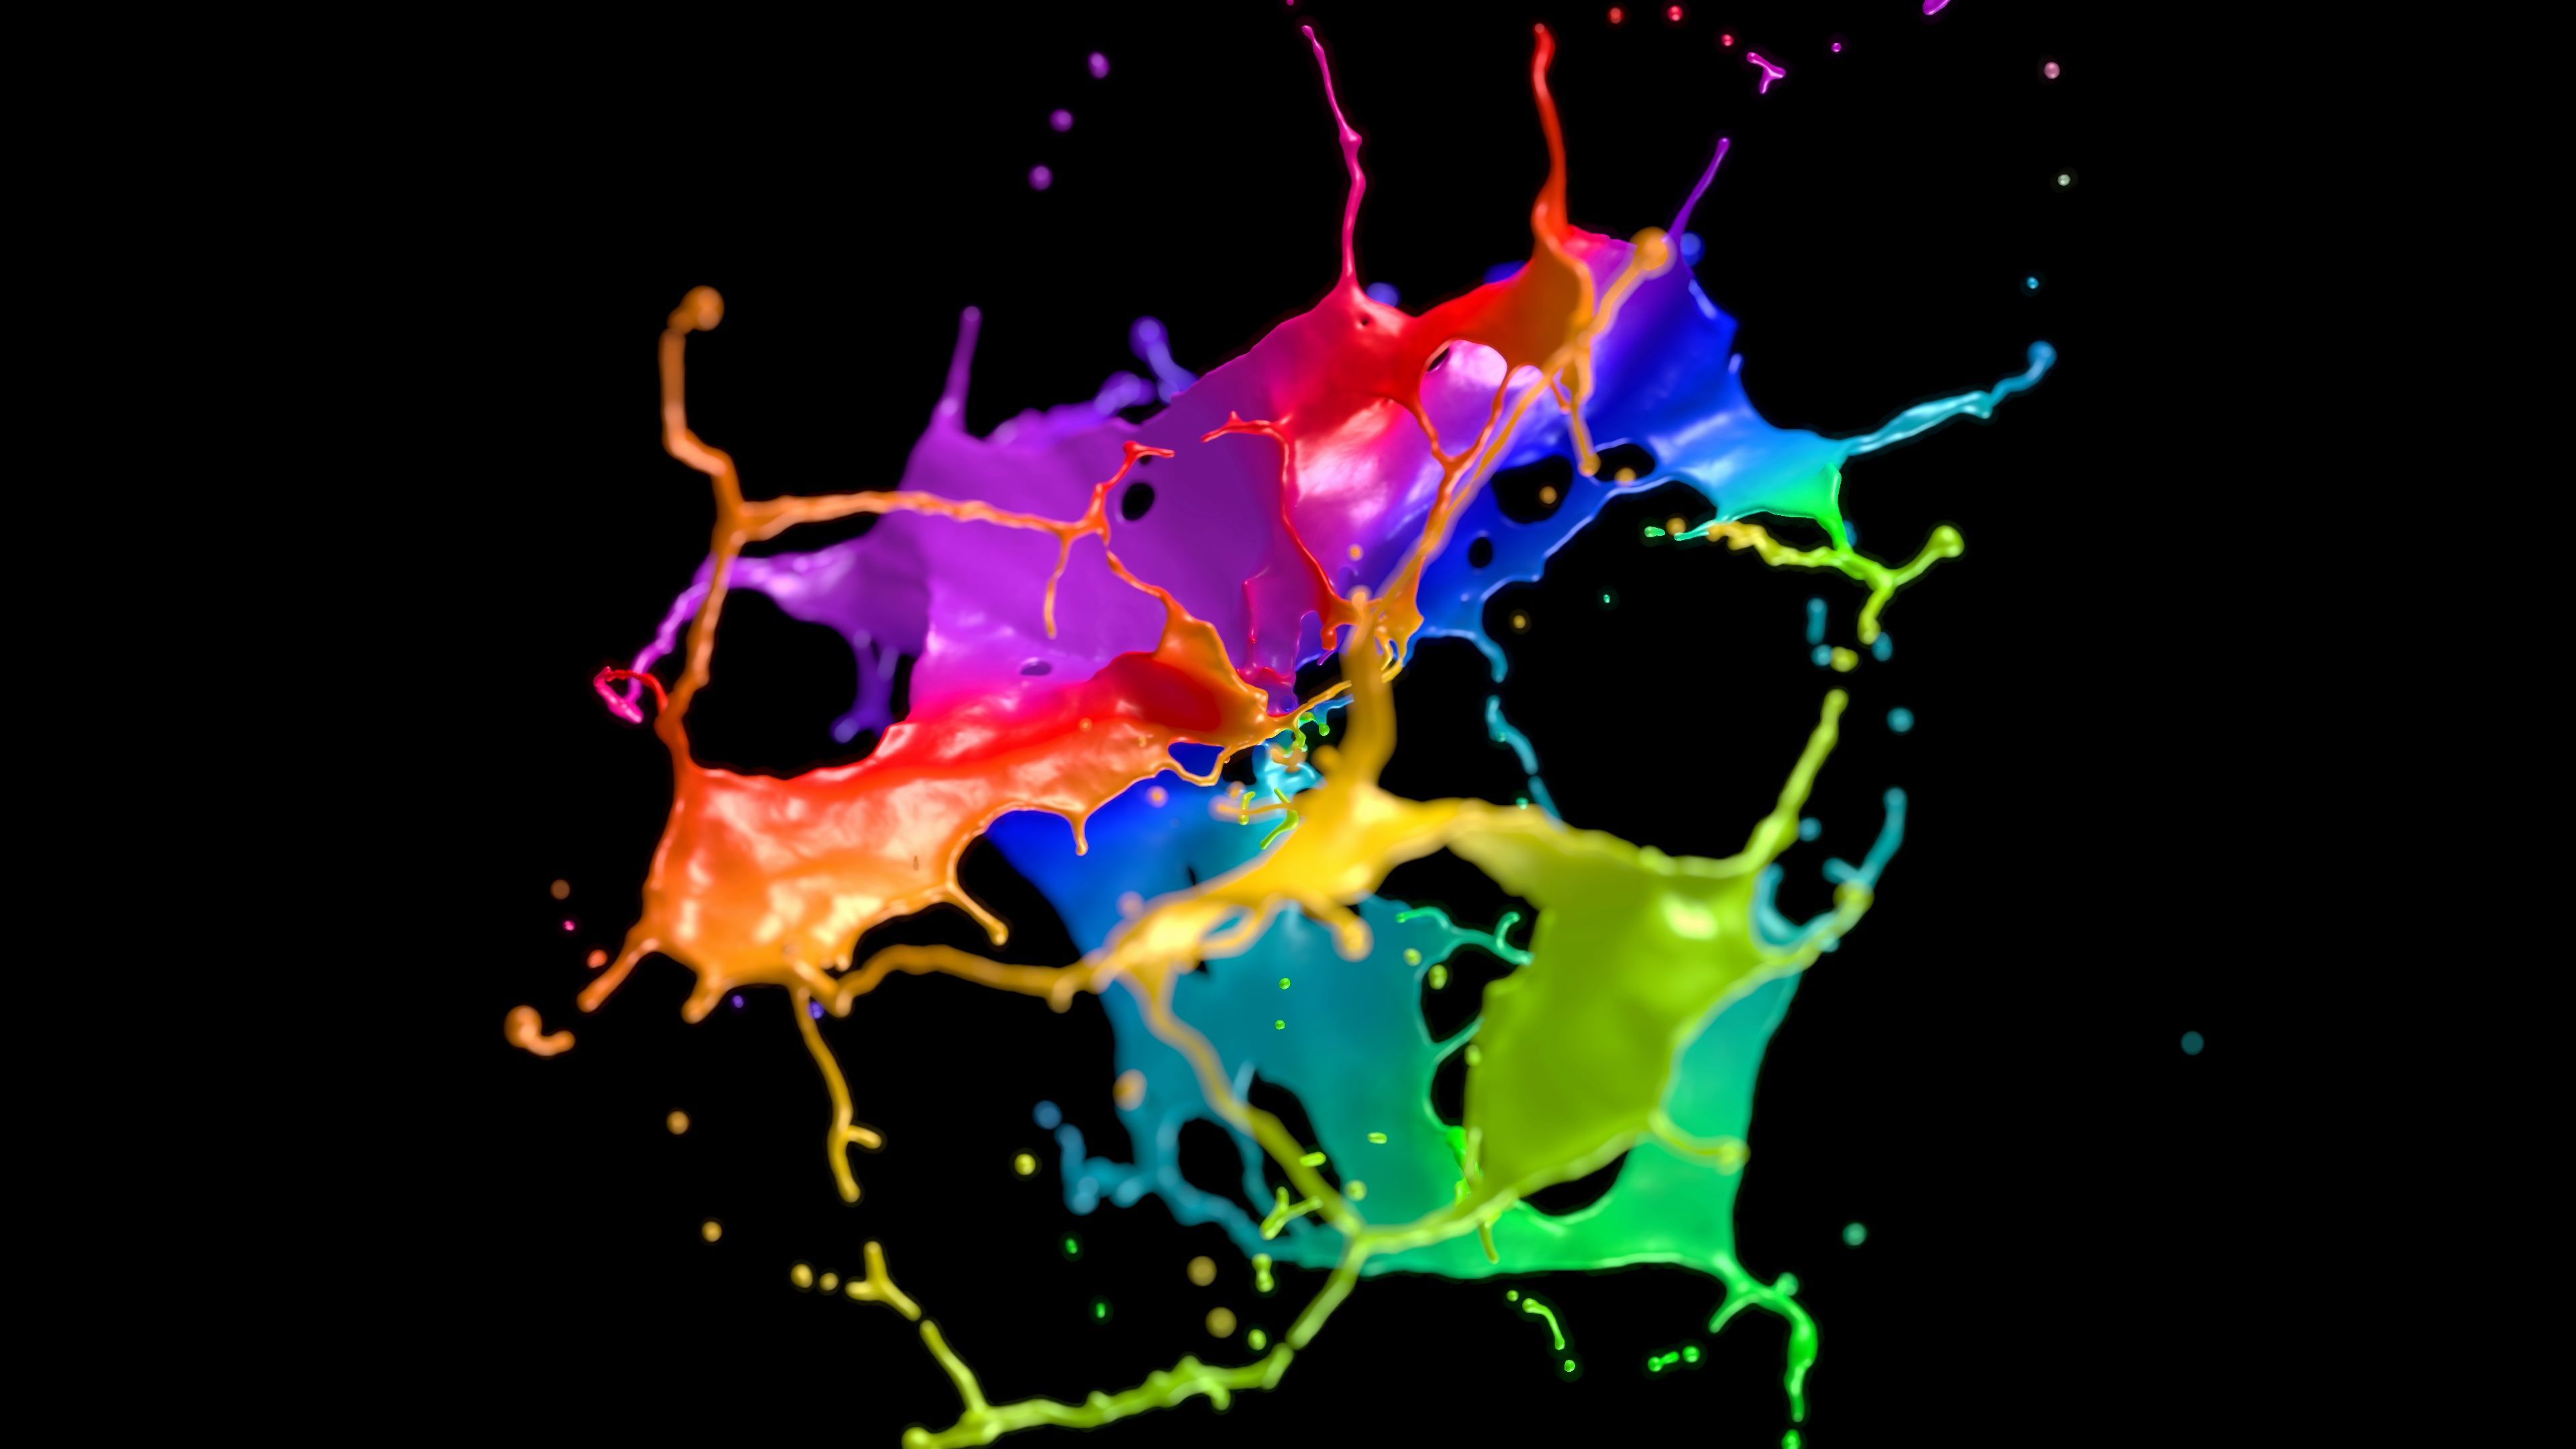 Cg animation of color paint explosion on black background. Slow motion. Has Stock Footage, #paint. Paint explosion, Watercolor video, Cute wallpaper for computer